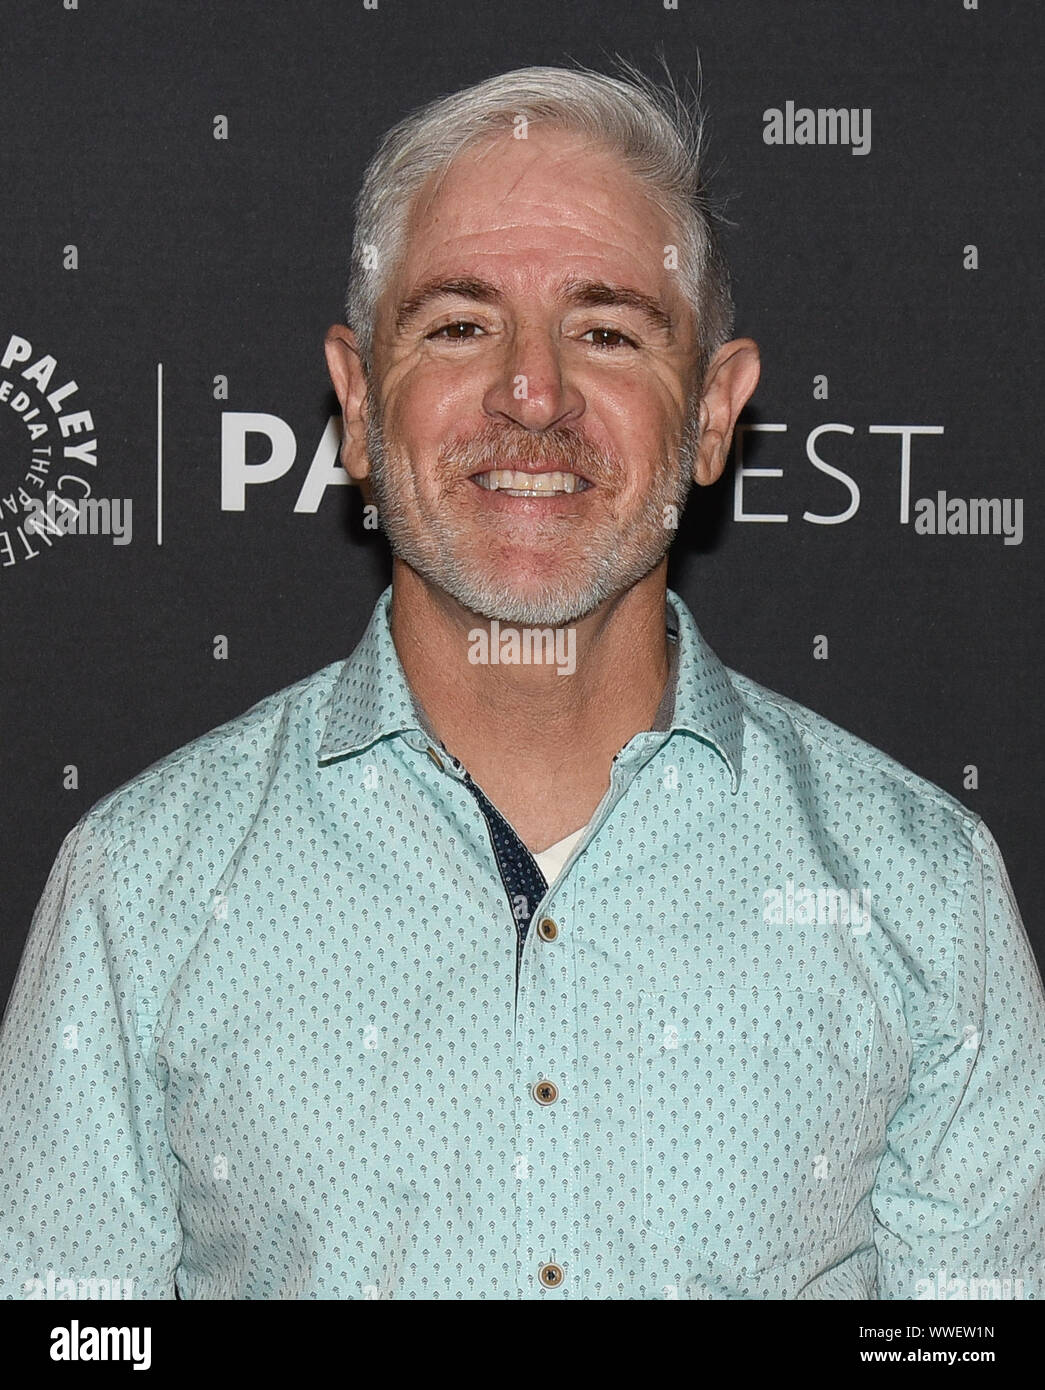 September 15, 2019, Beverly Hills, California, USA: Carlos Alazraqui of ''The Casagrandes'' The Paley Center For Media's 13th Annual PaleyFest Fall TV Previews - TBS. (Credit Image: © Billy Bennight/ZUMA Wire) Stock Photo